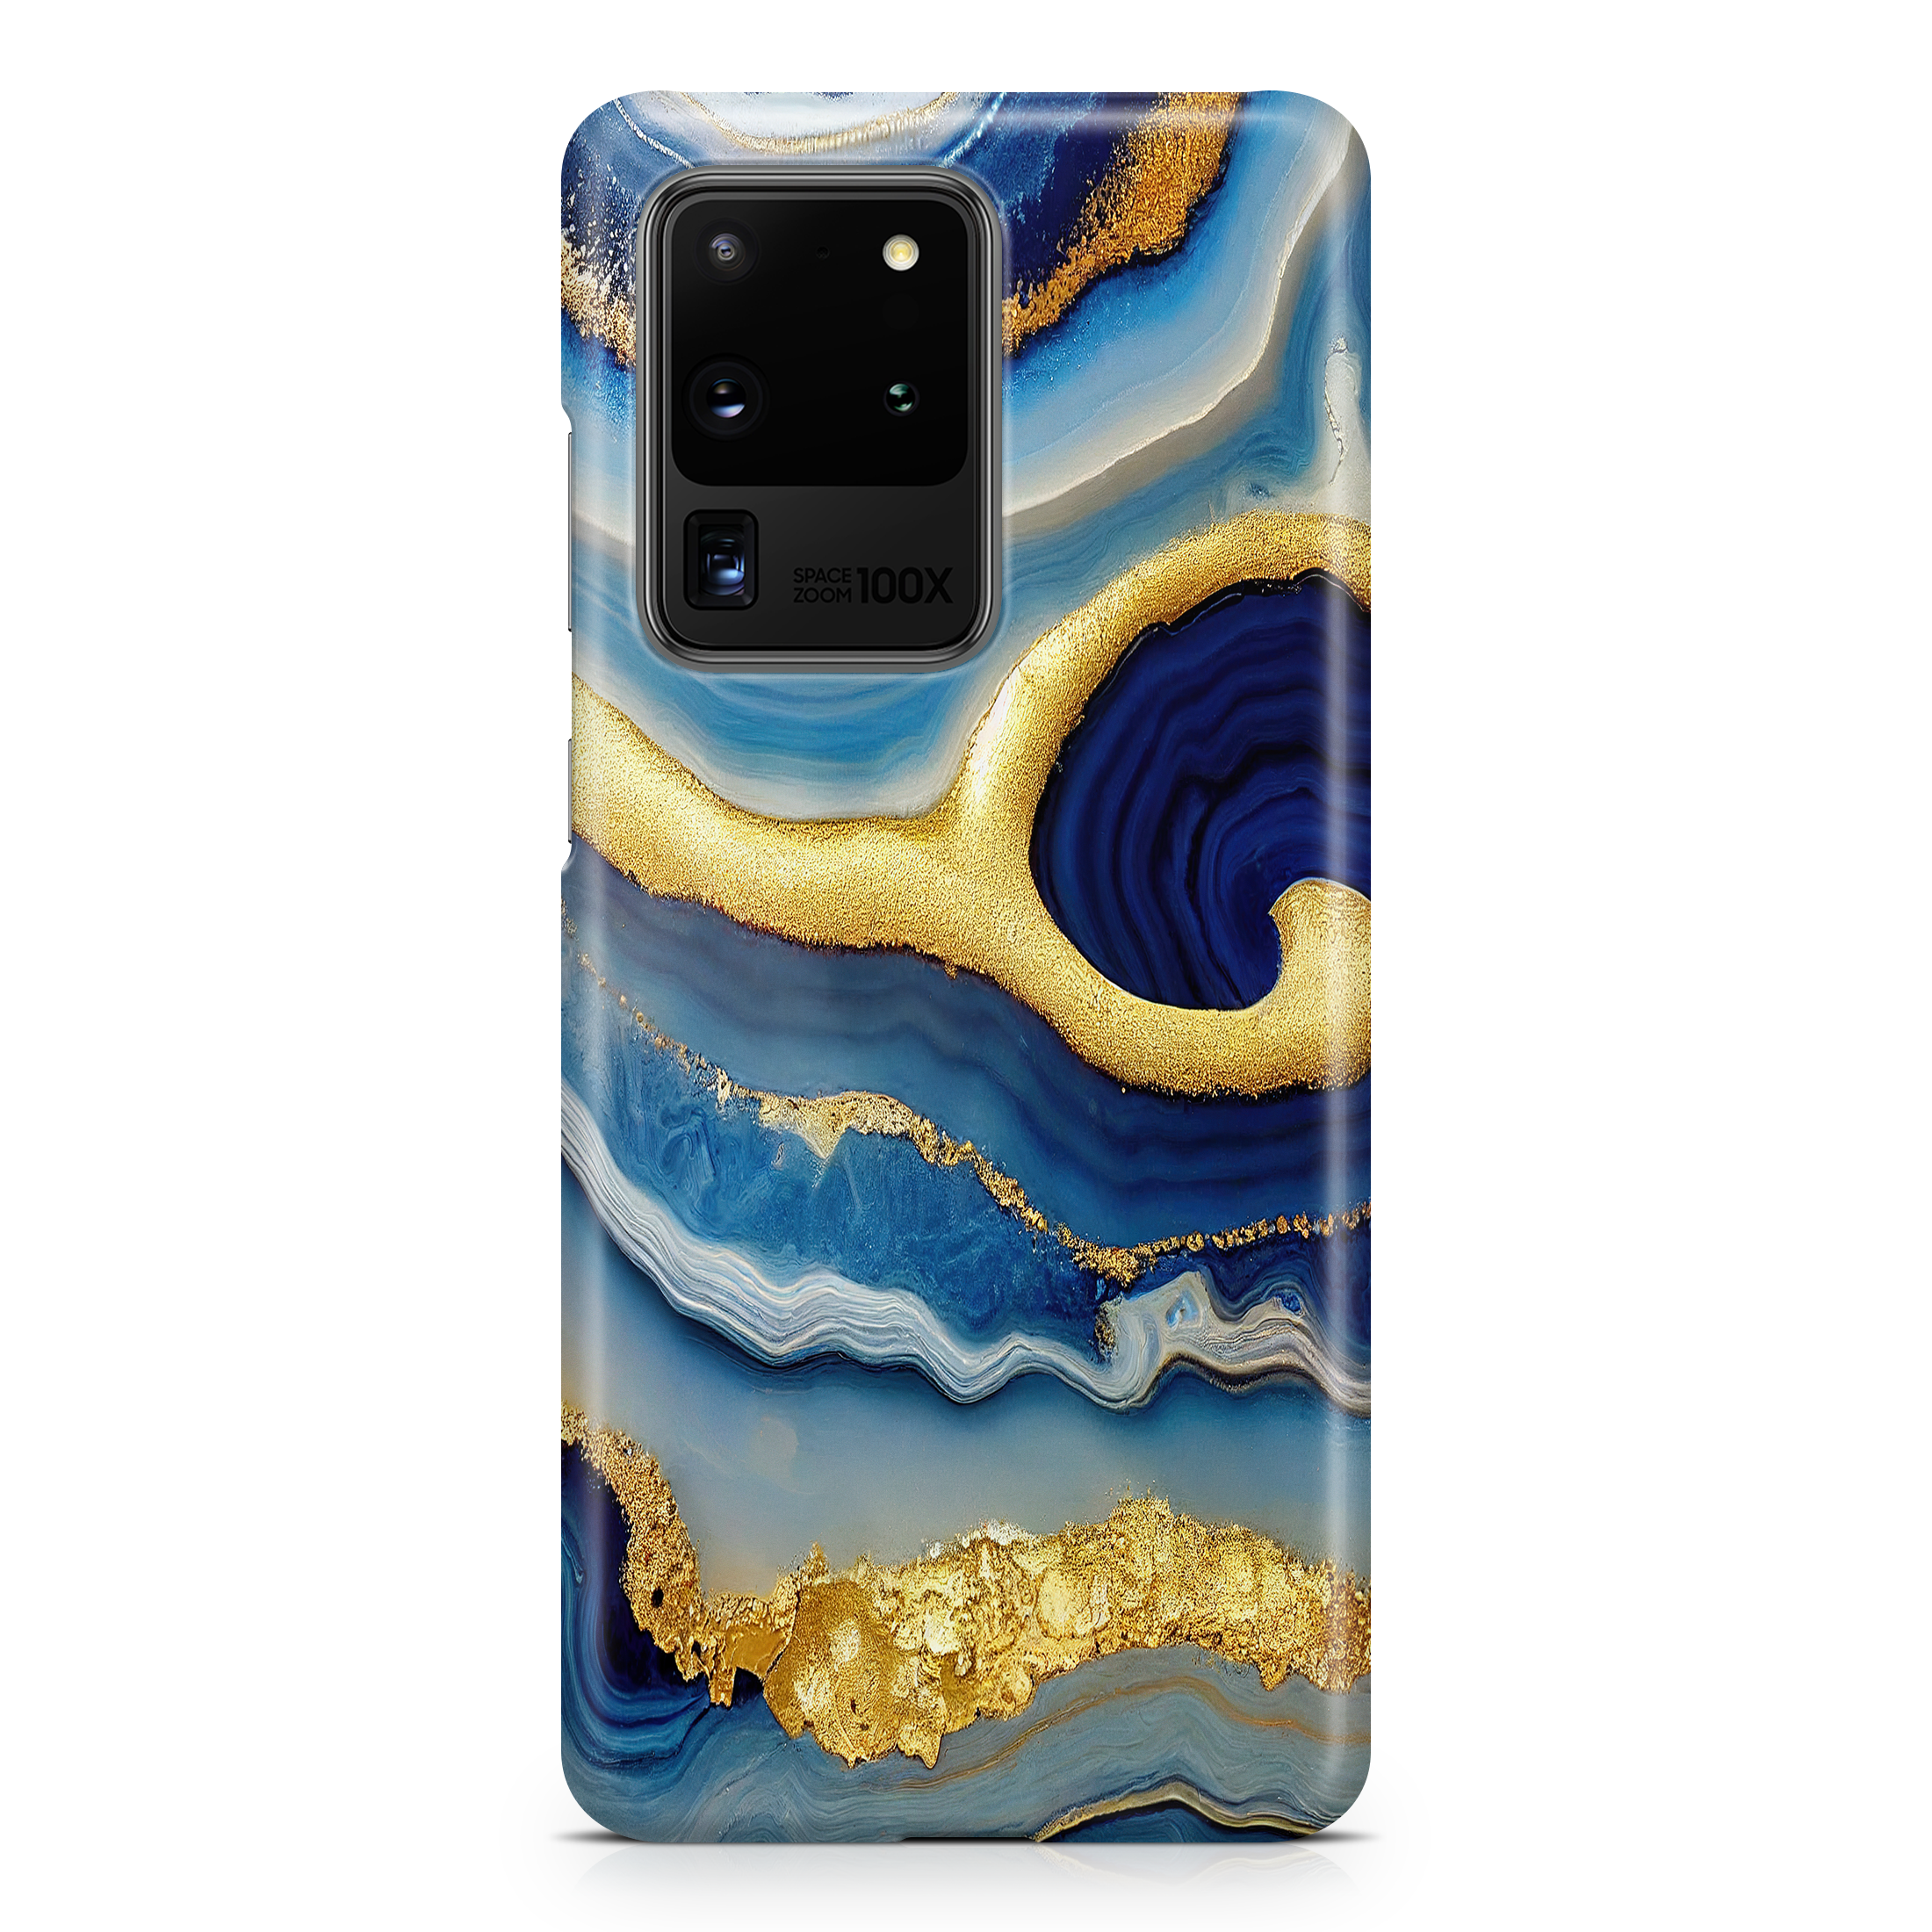 Magna Blue Marble - Samsung phone case designs by CaseSwagger